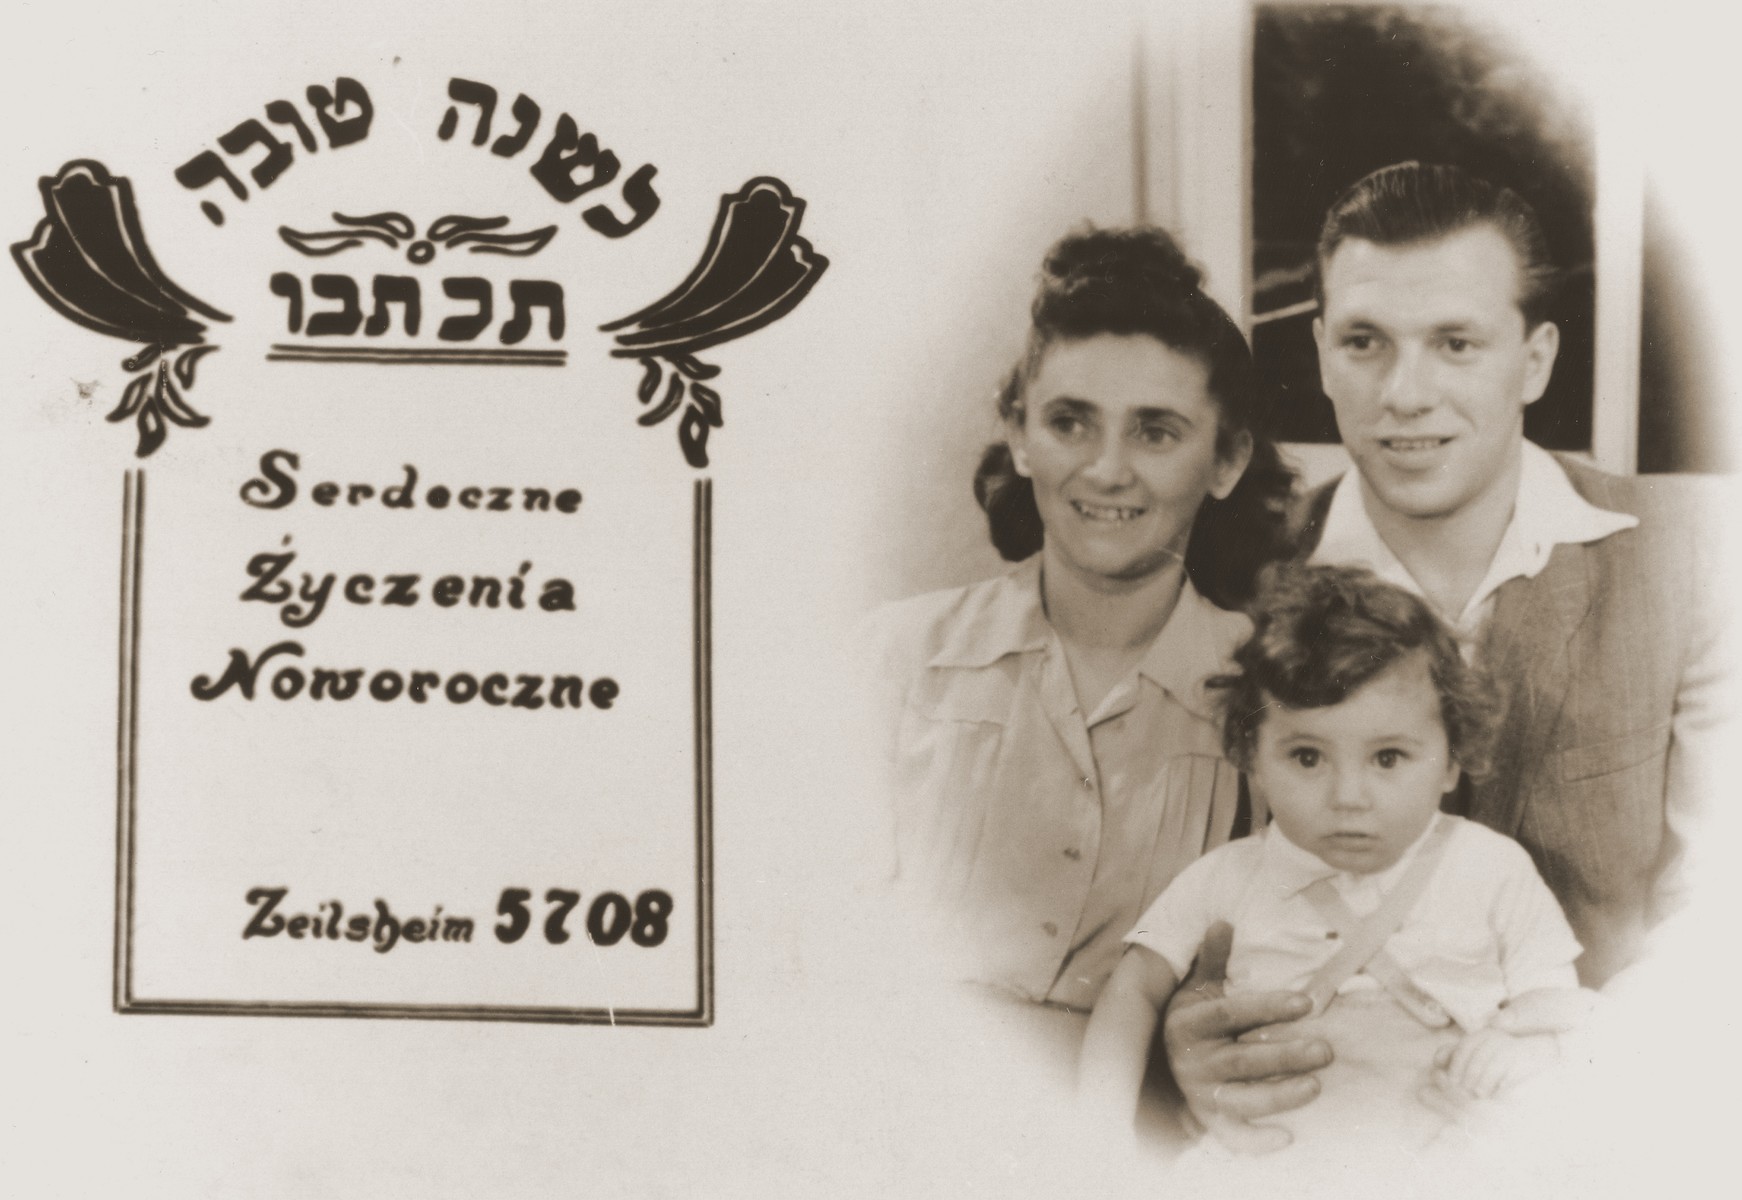 Personalized Jewish New Year's card with a photograph of the Weintraub family who were living in the Zeilsheim displaced persons camp.

Pictured are David, Hanka and Izak Weintraub, who were originally from Sosnowiec, Poland.